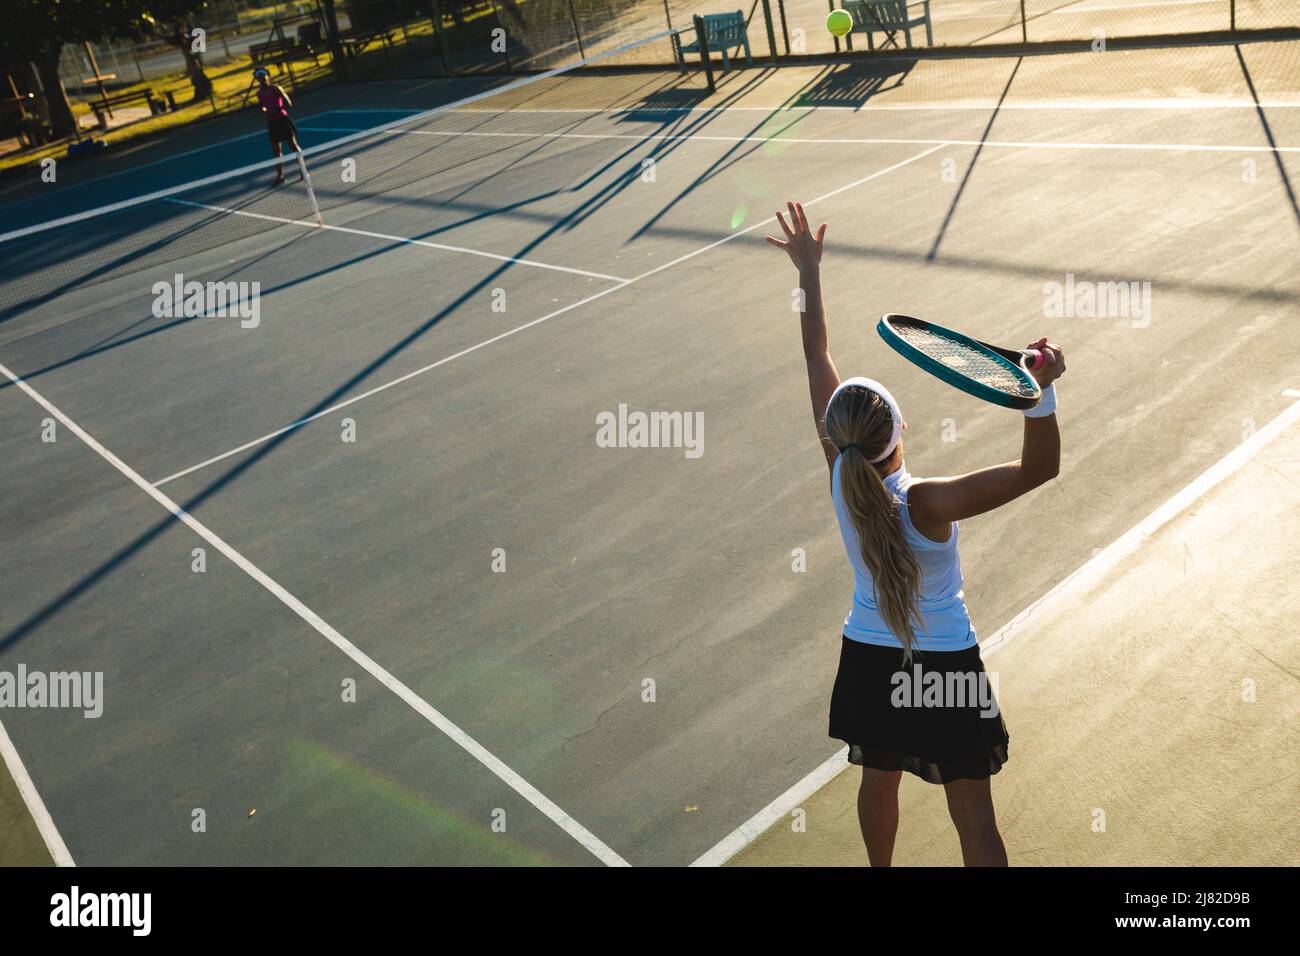 High angle view of young female caucasian player serving during tennis game at court Stock Photo